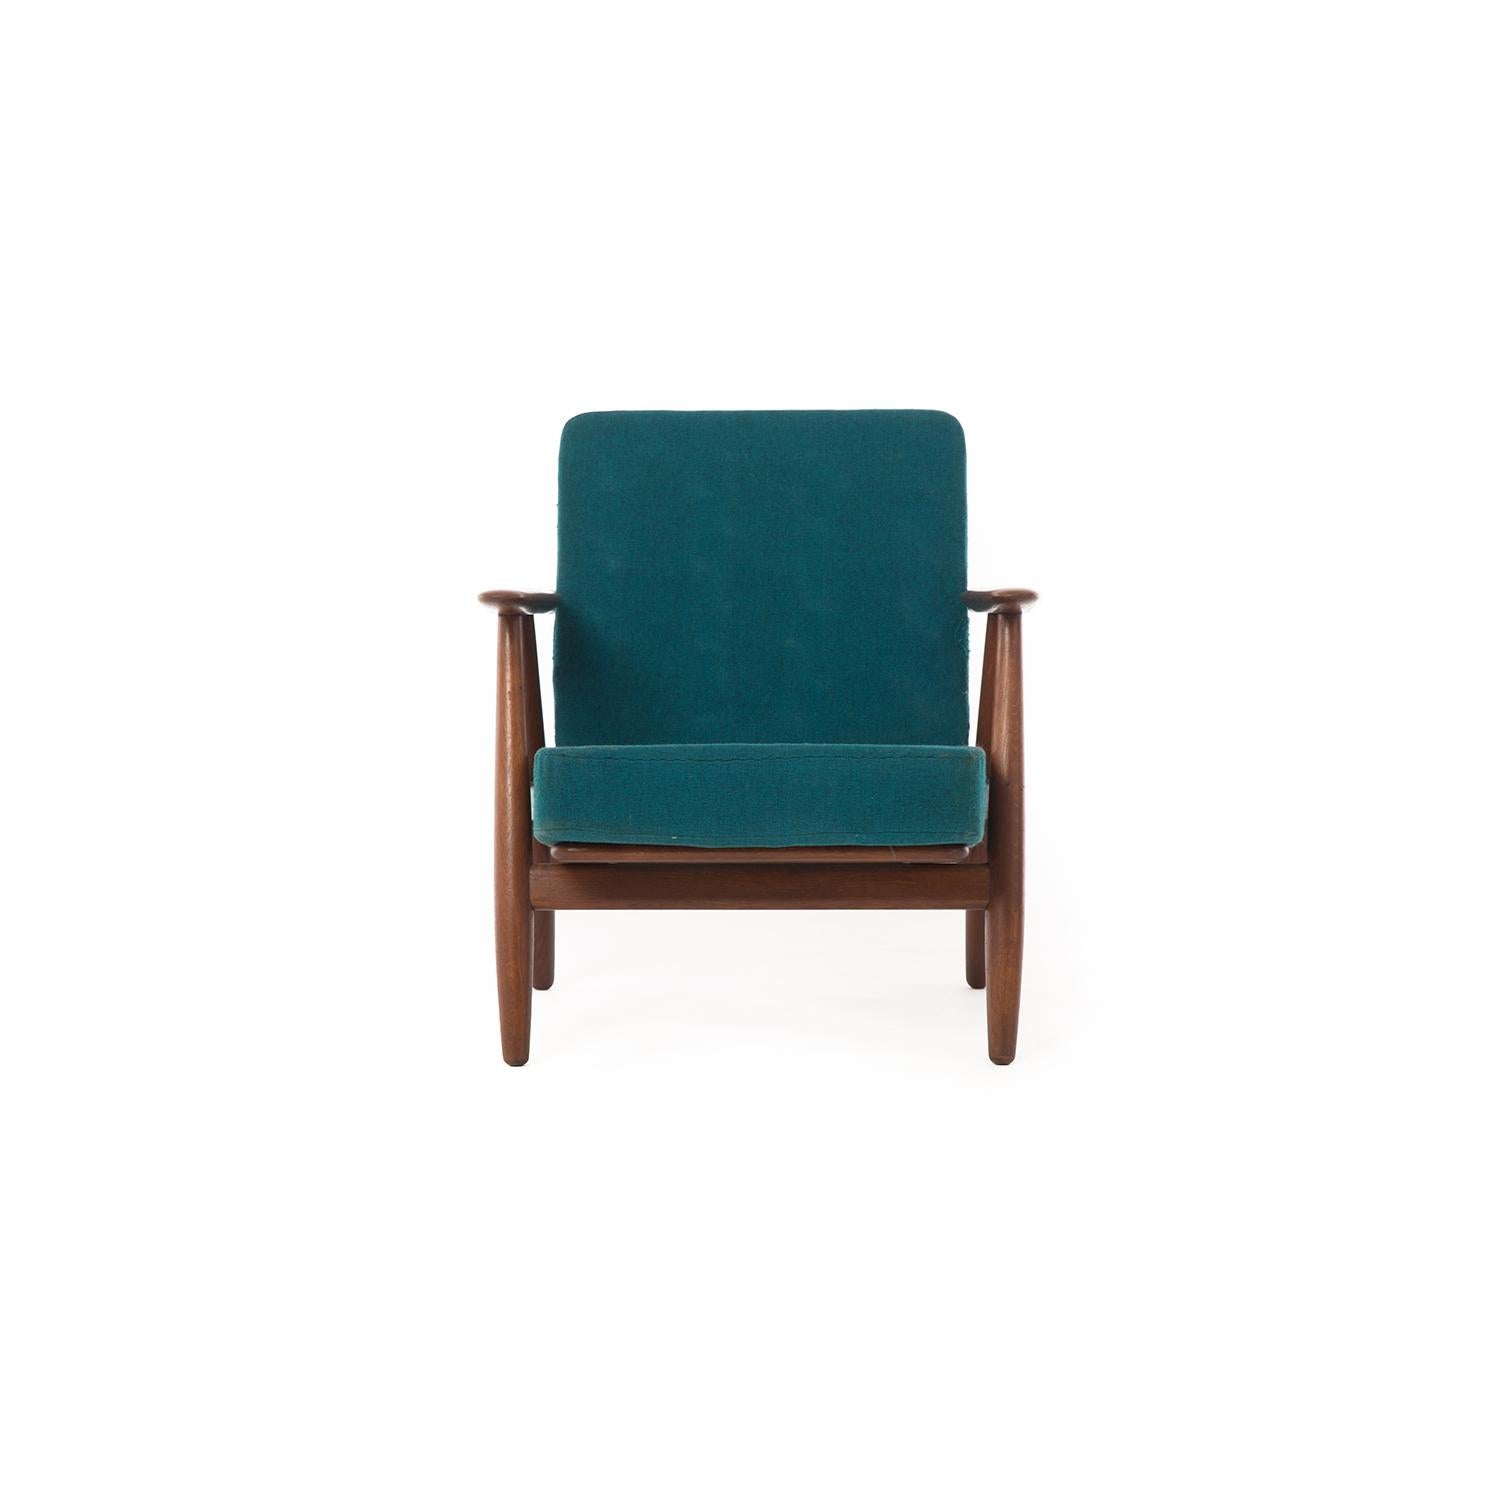 With sculpted armrests and angled legs, the GE-240 chair design is one of Wegner‘s most comfortable lounge chairs. This set of oak Hans Wegner lounge chairs have their original spring cushions upholstered in an ocean colored textile.


Professional,